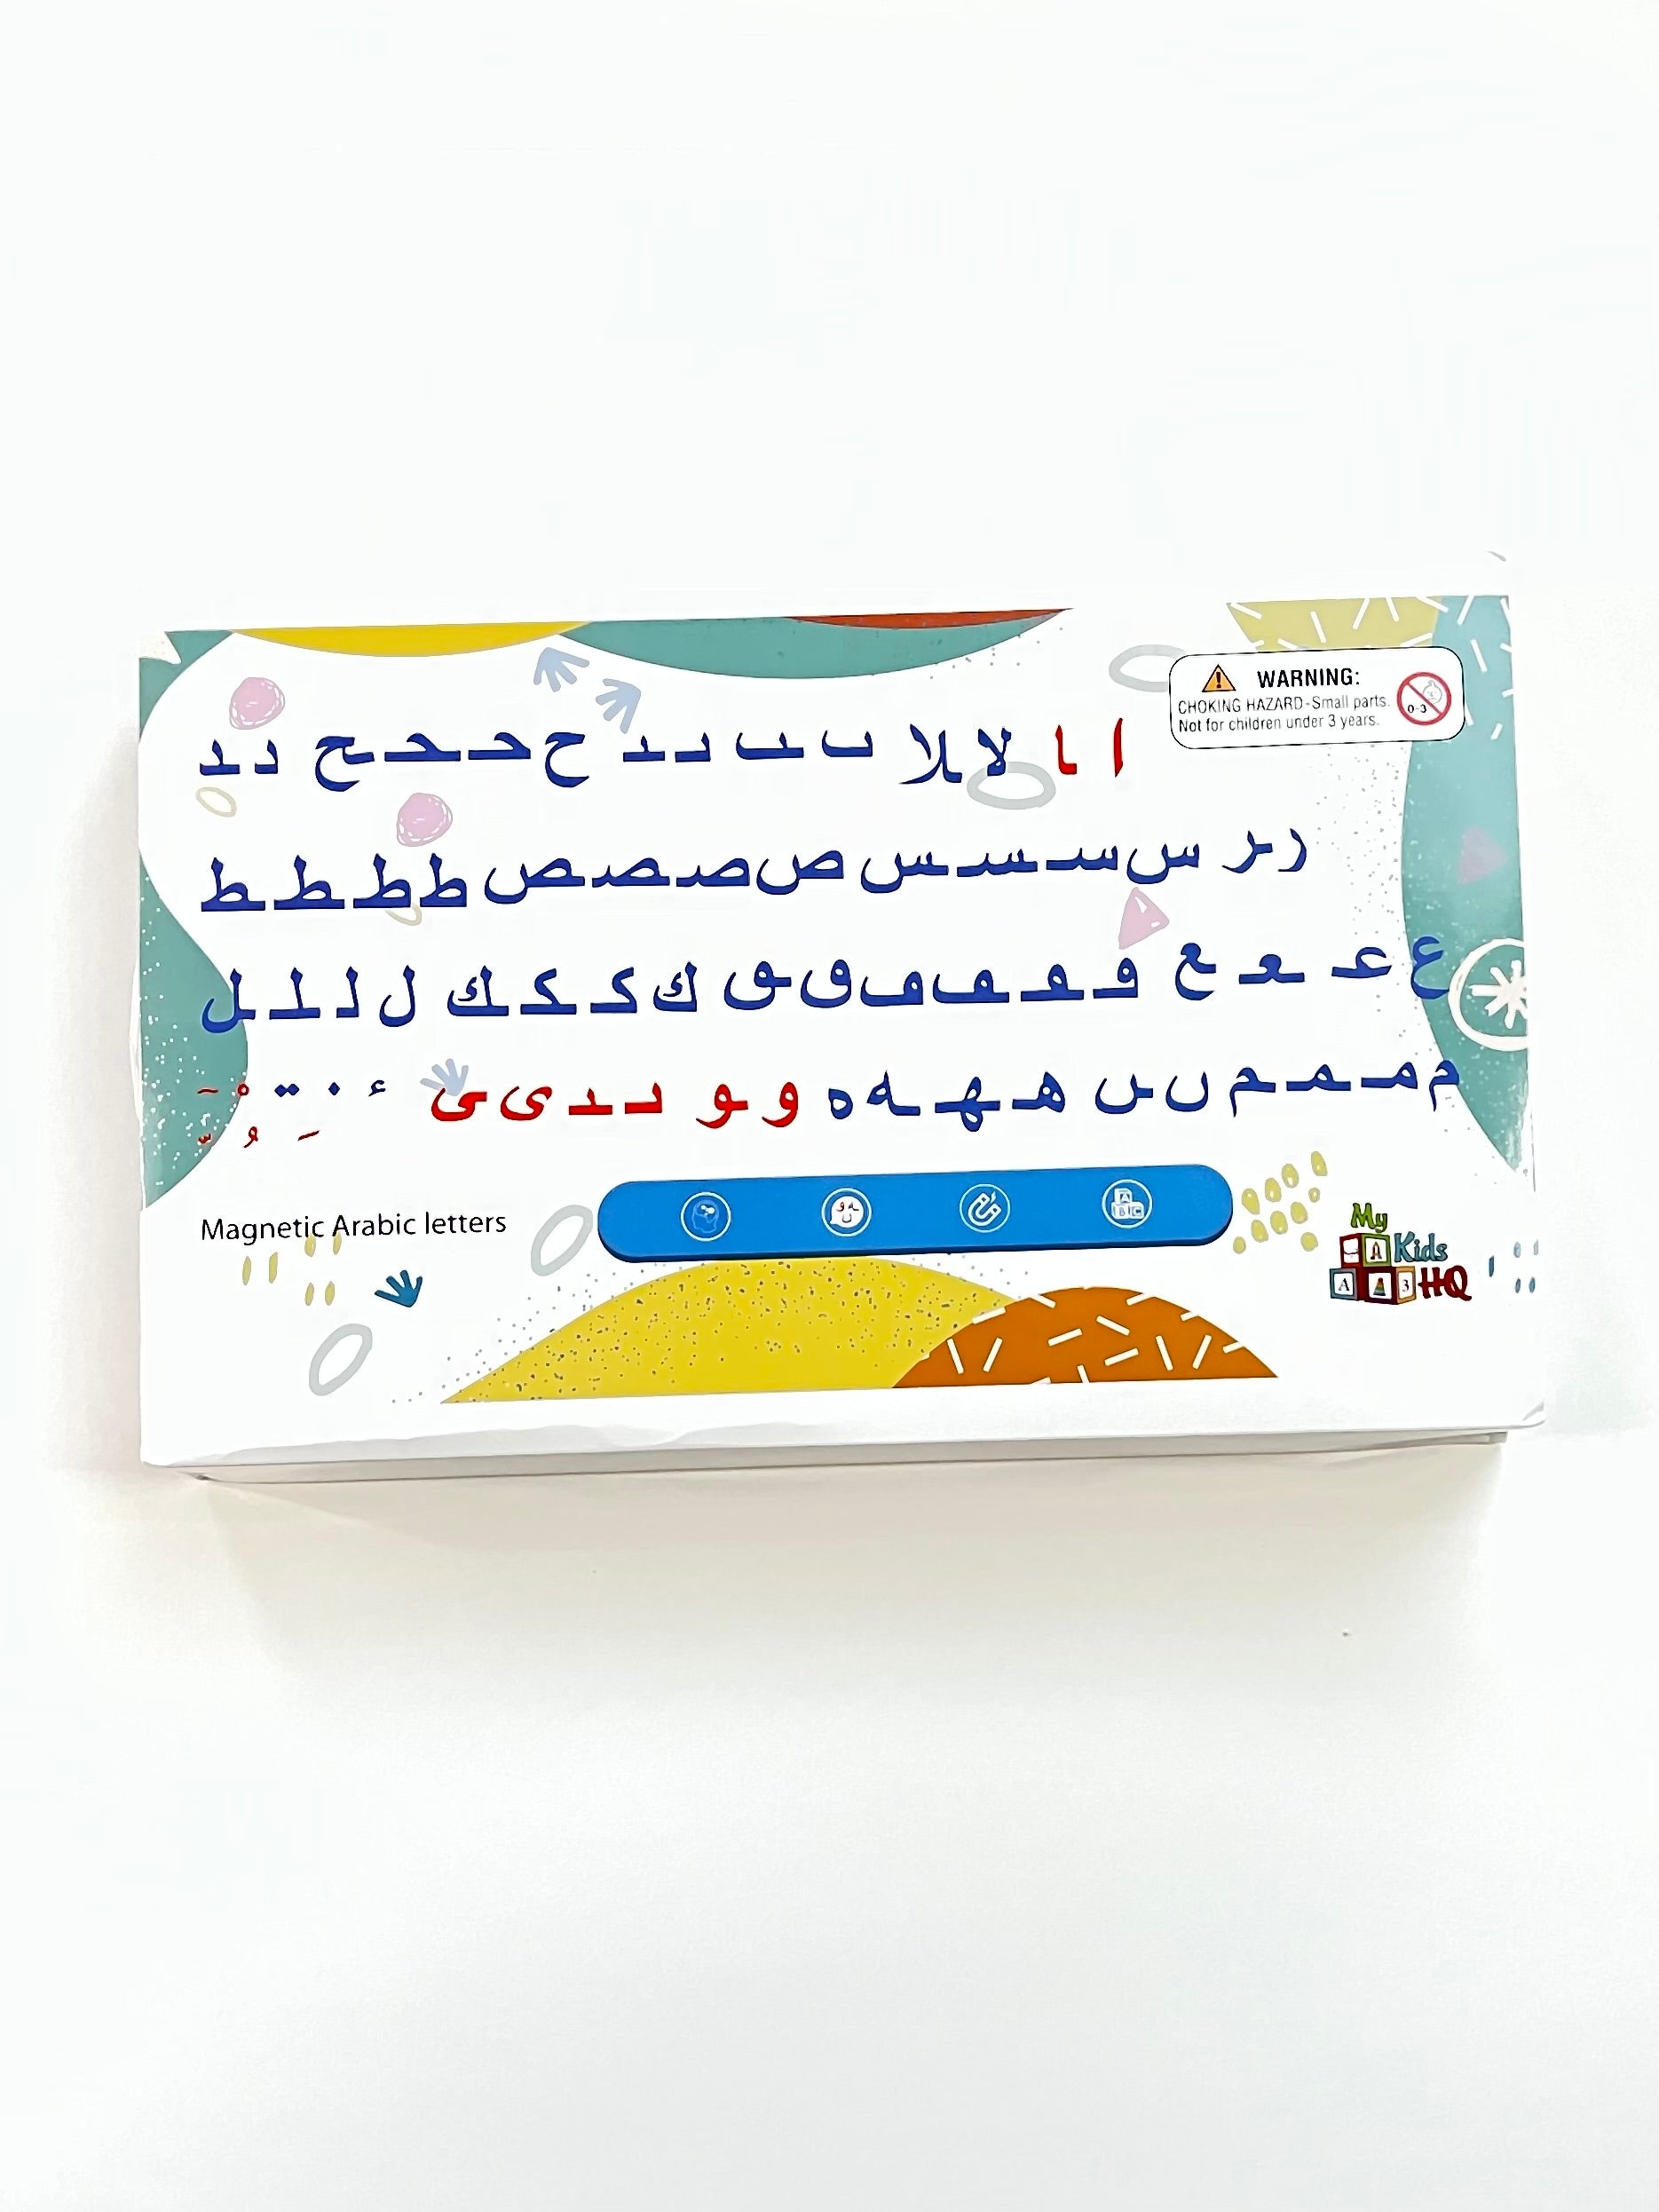 Arabic Magnetic Letters in forms